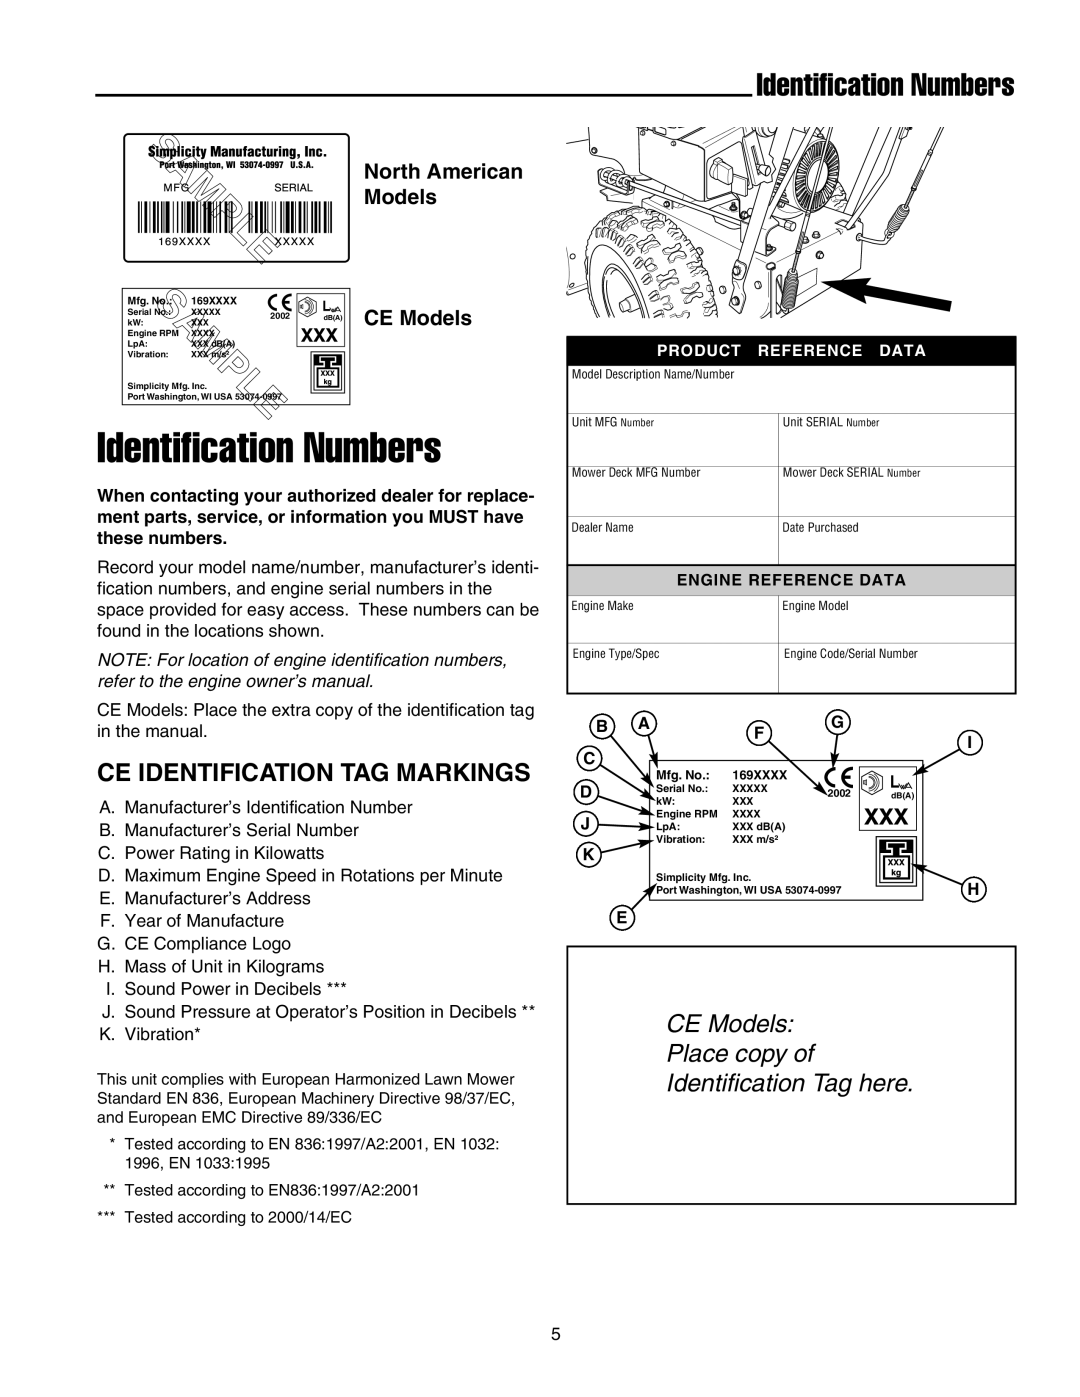 Snapper 555 manual Identification Numbers, Ce Identification Tag Markings, CE Models Place copy of Identification Tag here 